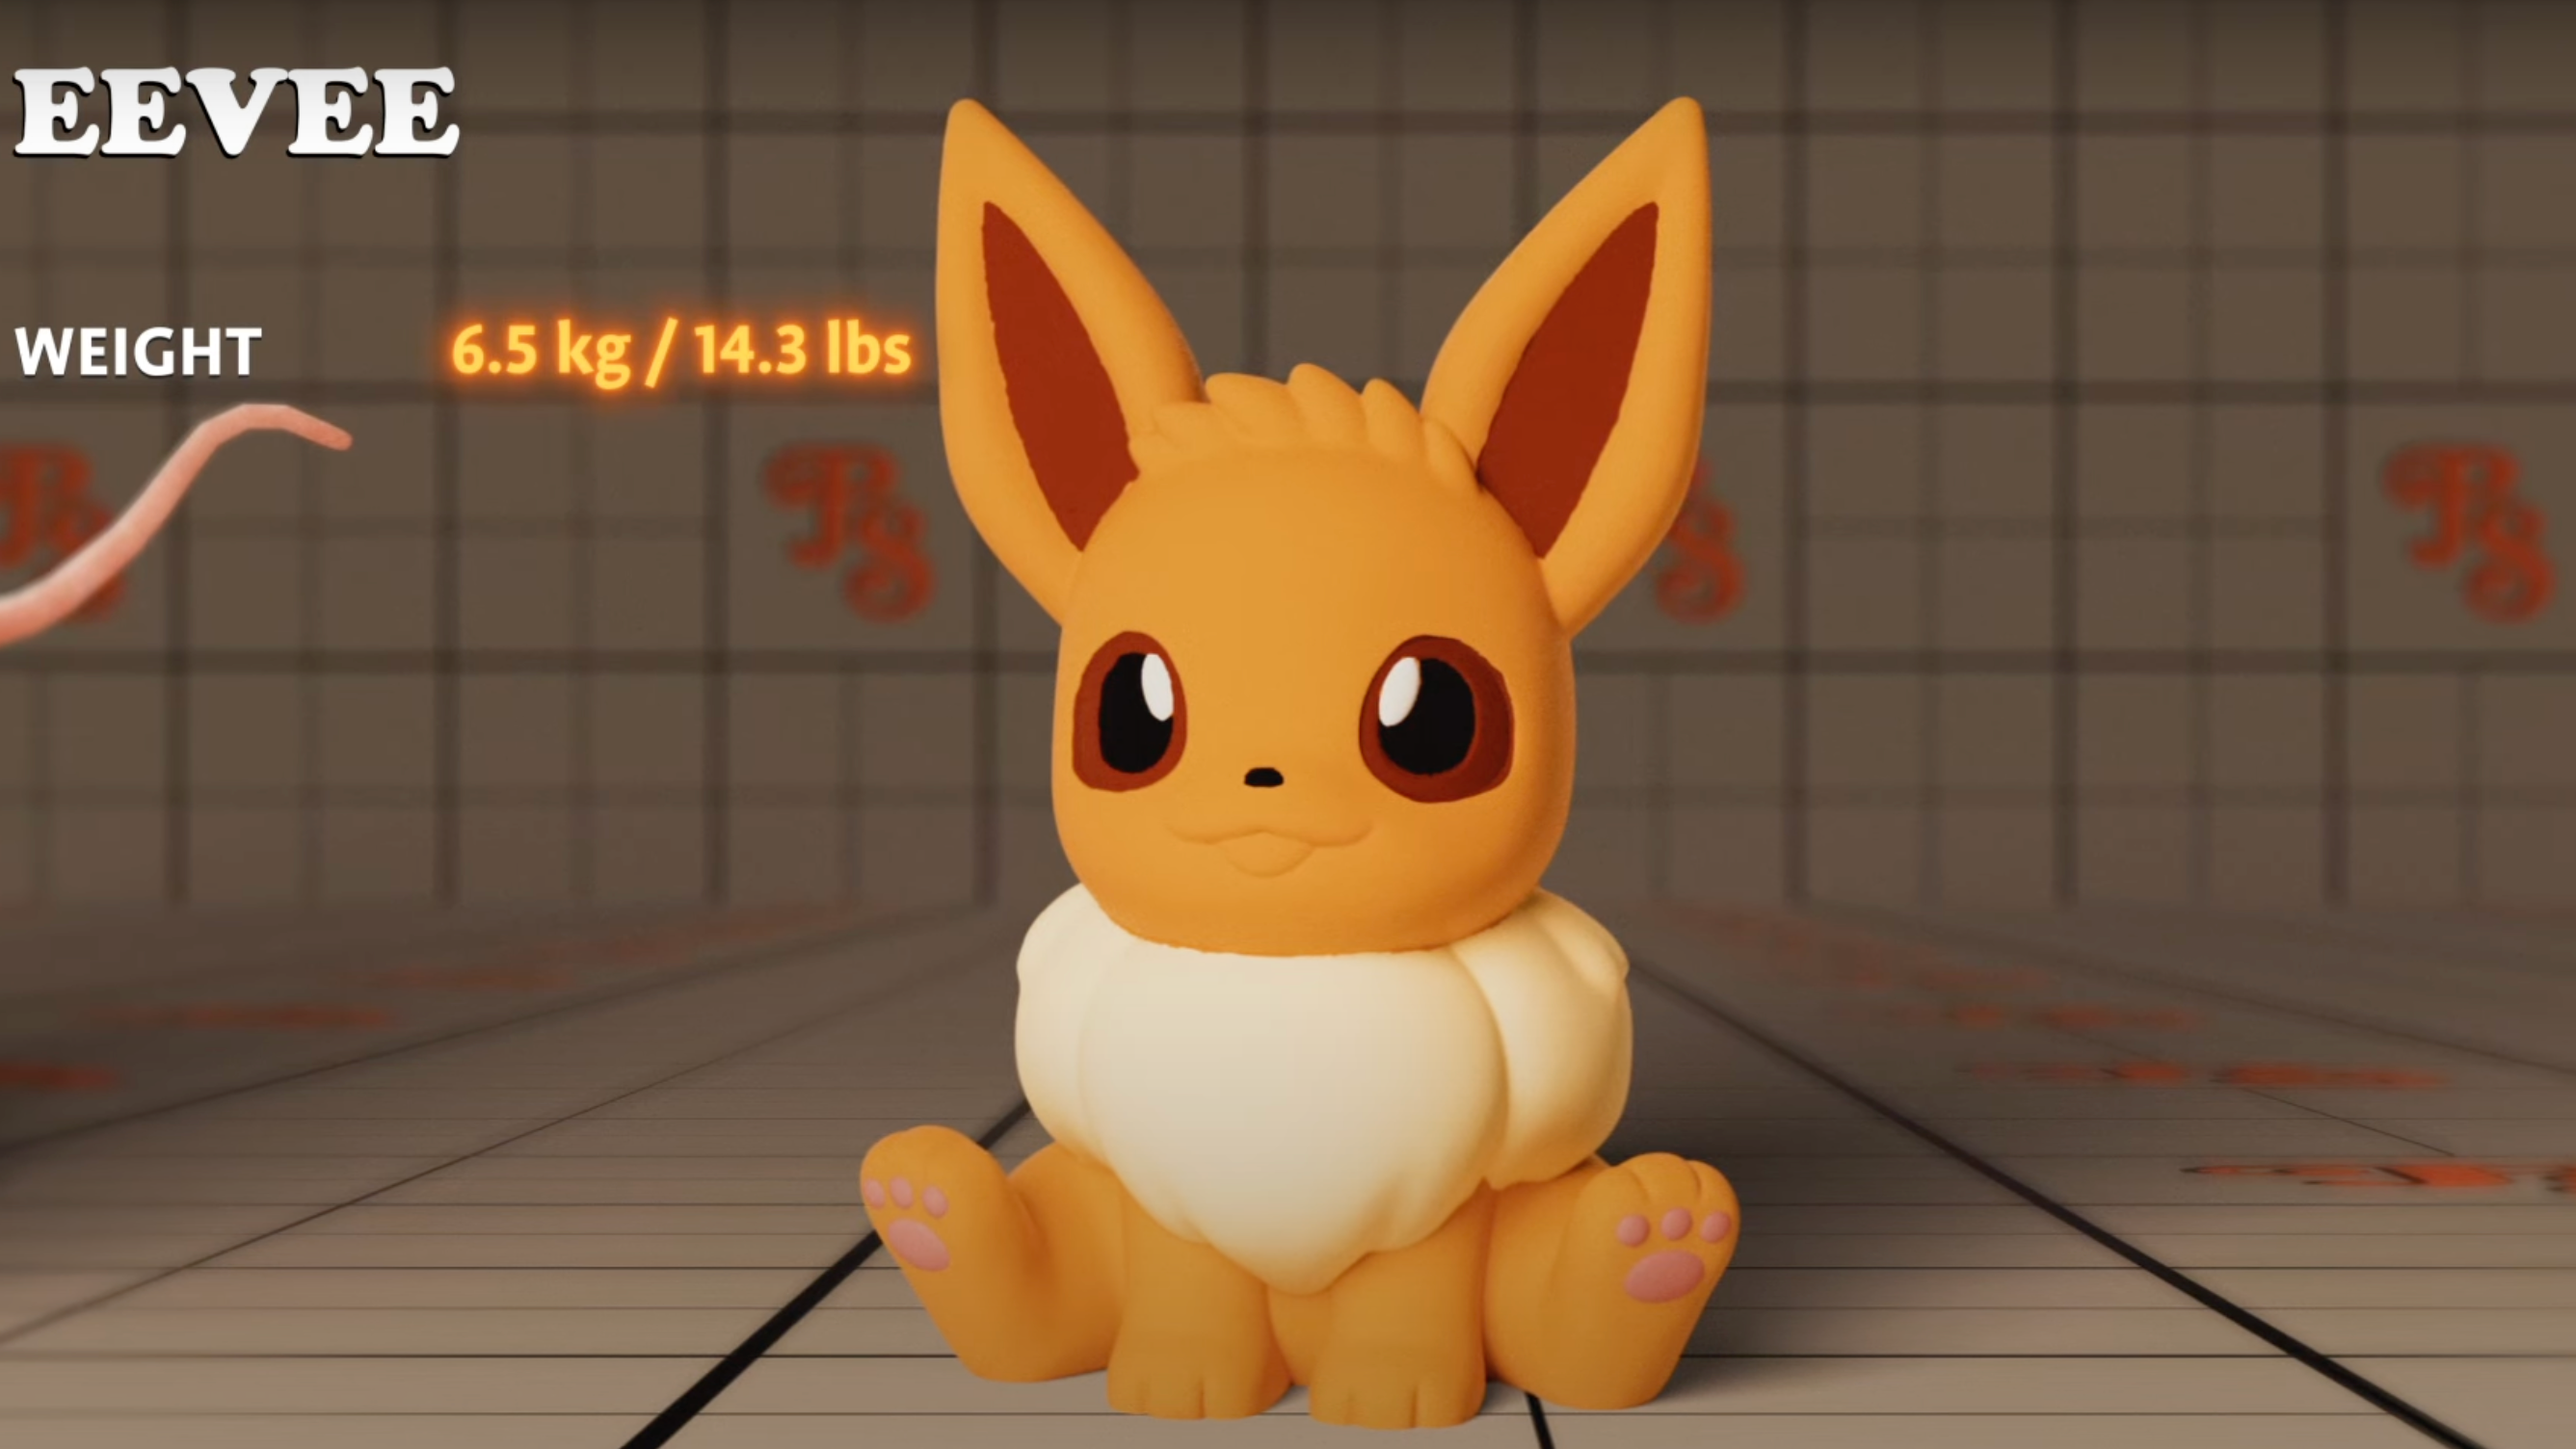 pokemon character Eevee that looks like a rabbit plus a cat.